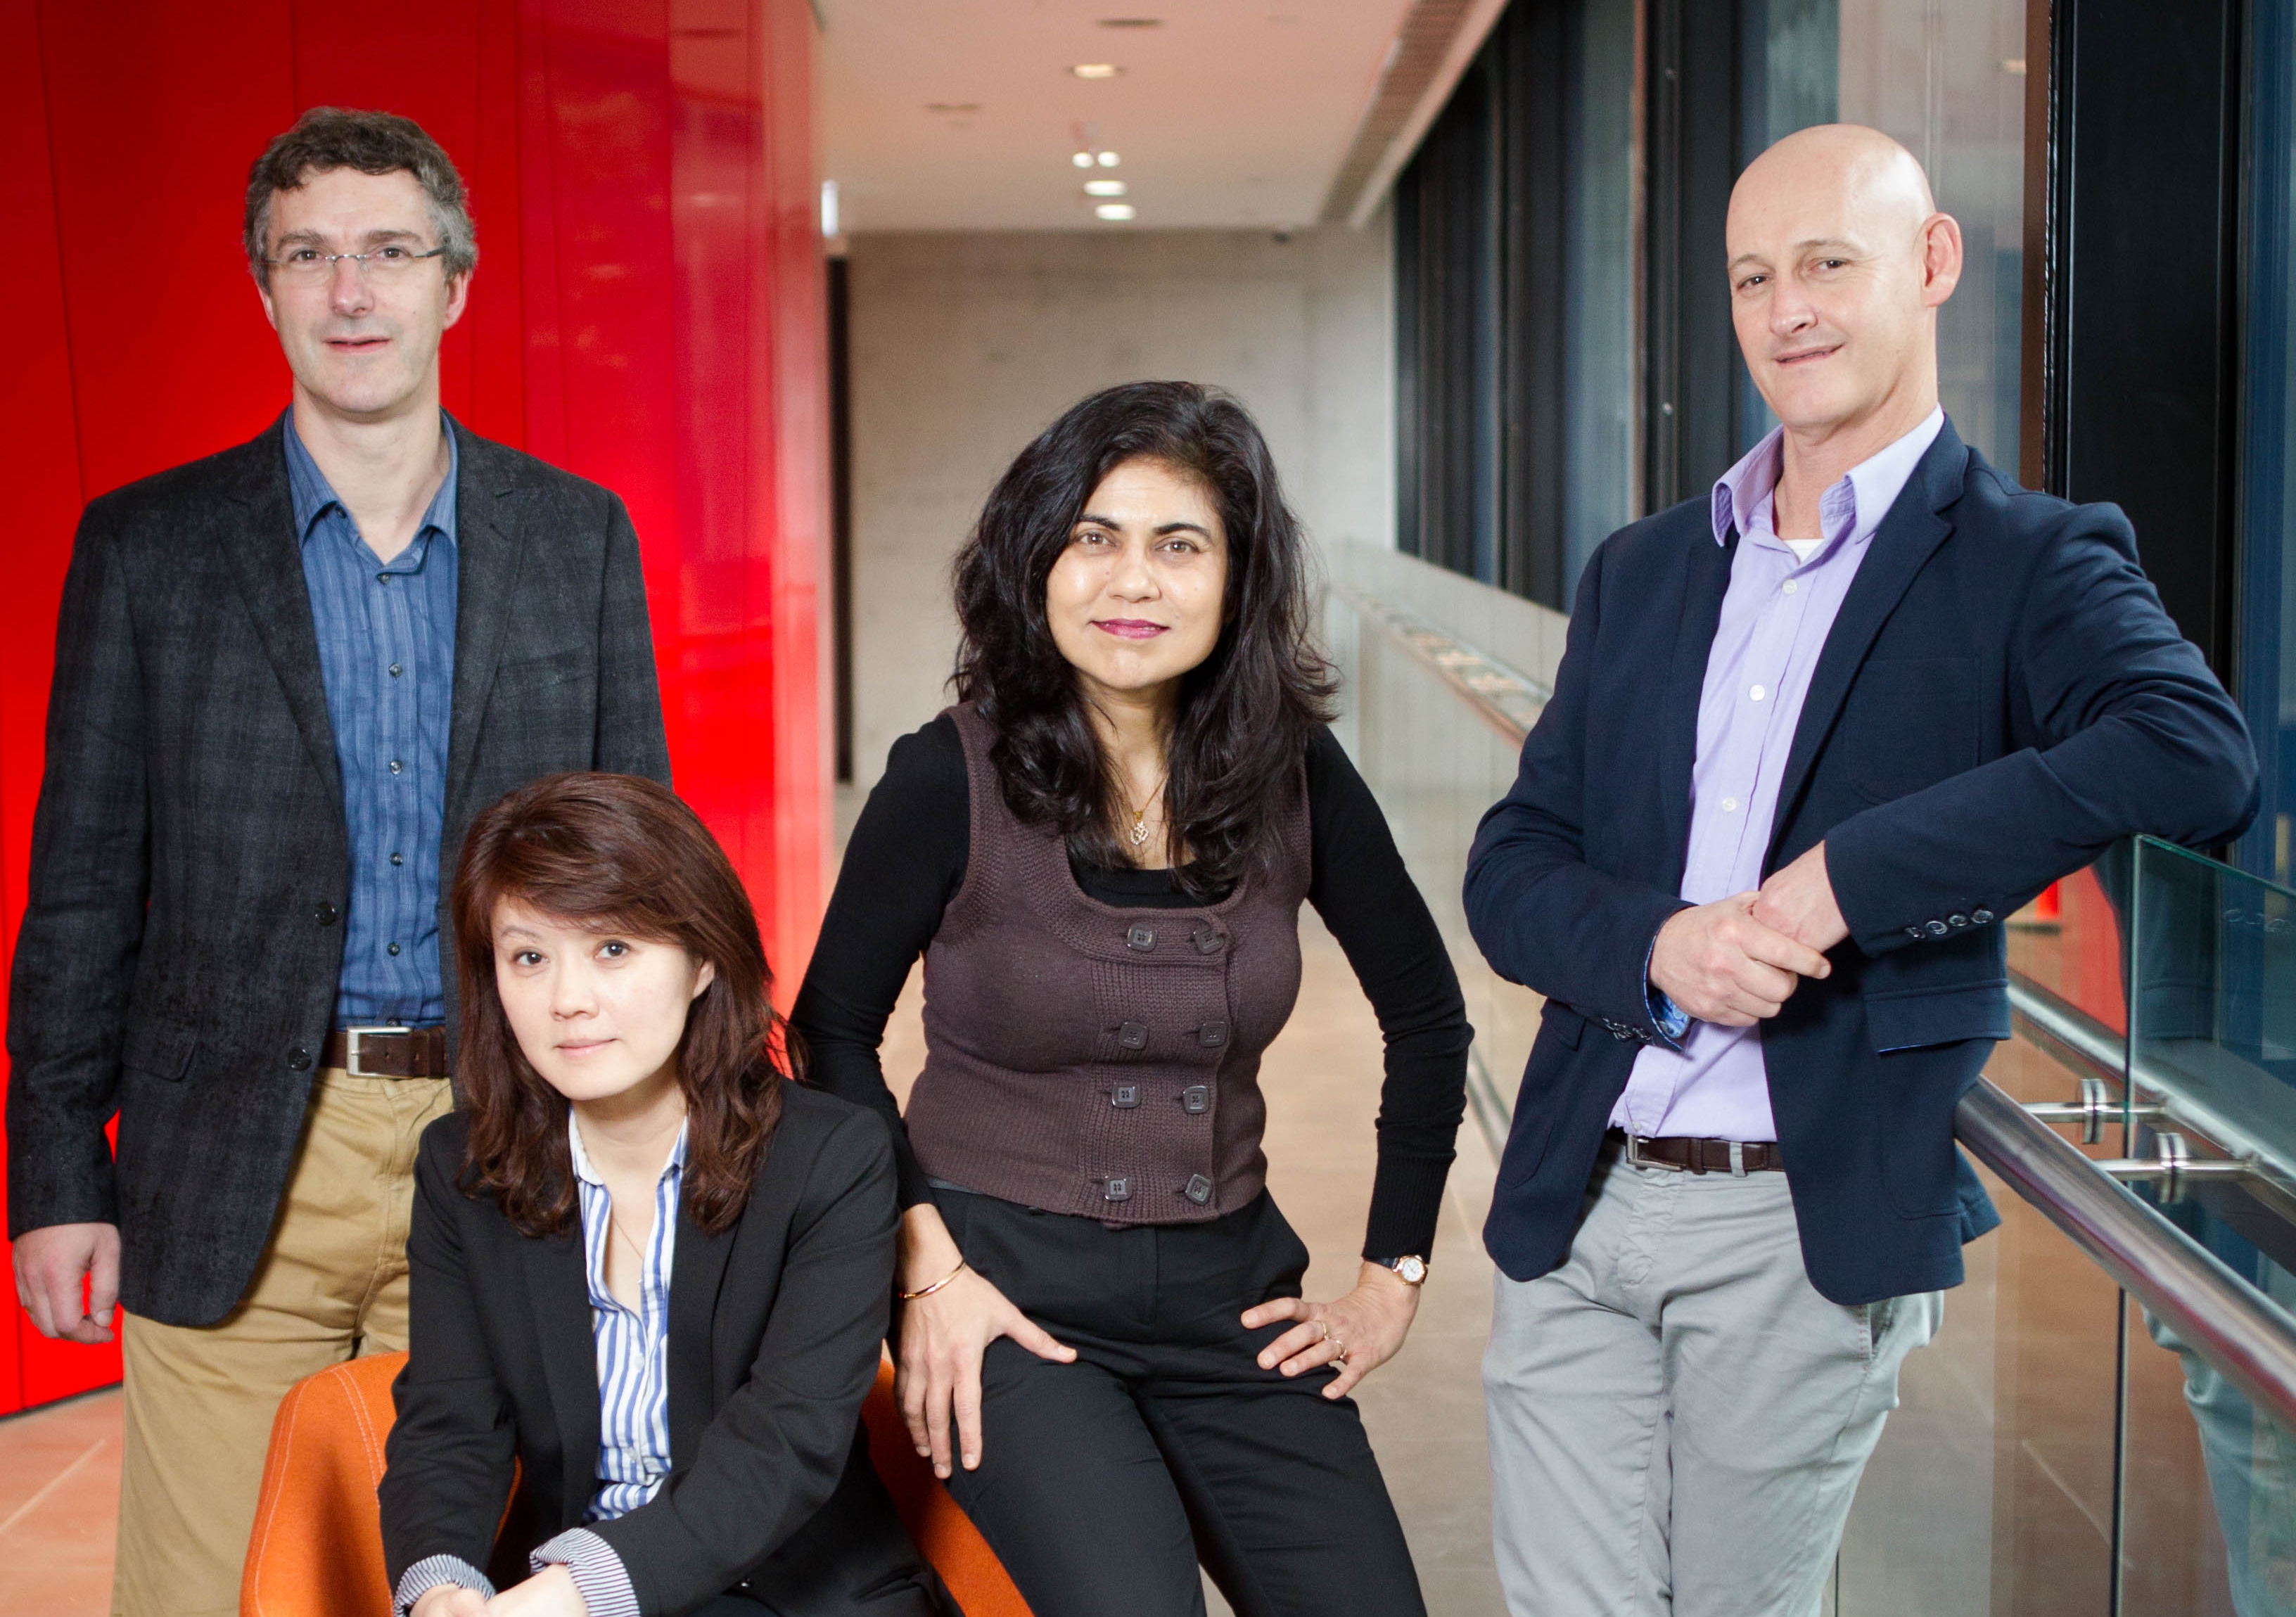 Engineering heavyweights: Christoph Arns, Rose Amal, Veena Sahajwalla and Nigel Lovell - among the seven UNSW academics named in the annual Top 100 Most Influential Engineers in Australia list.